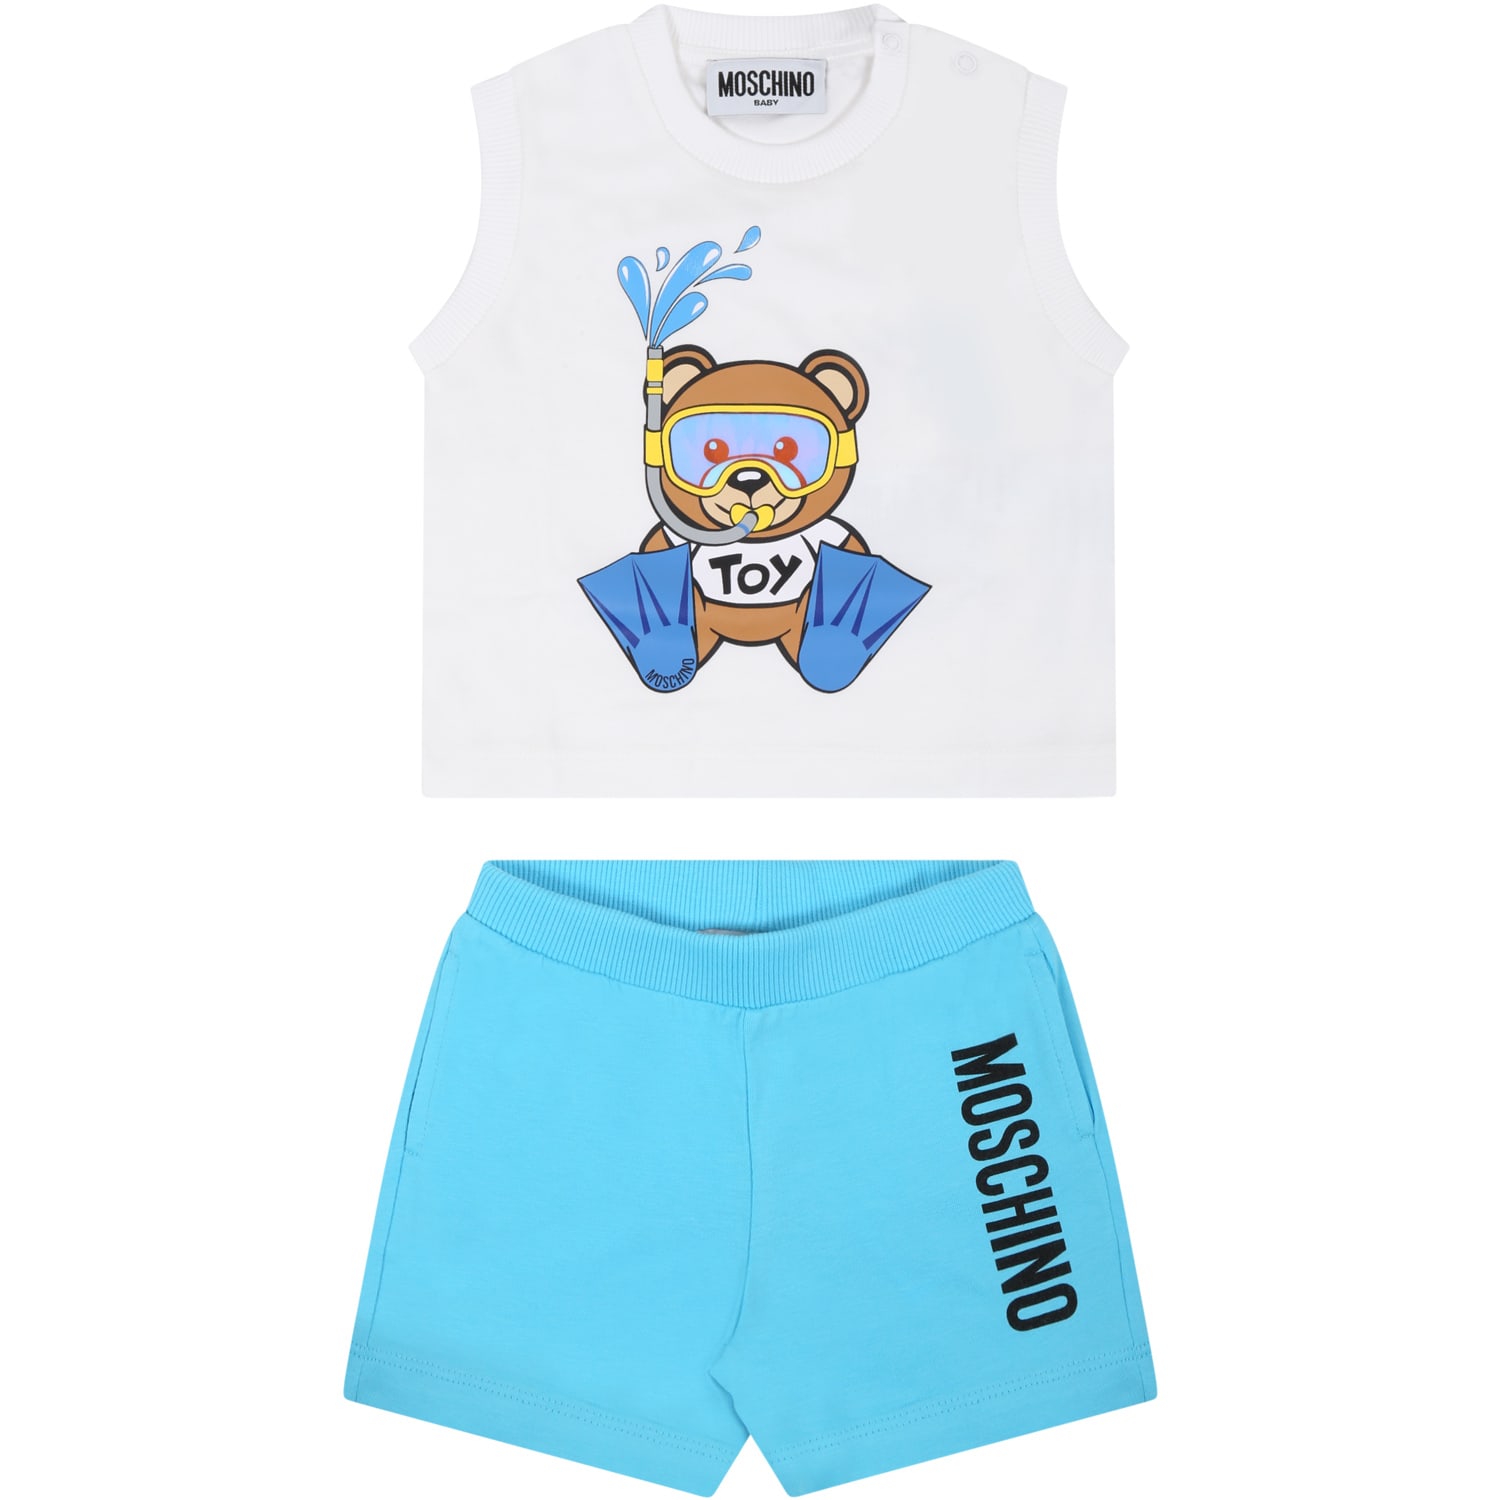 Moschino Multicolor Set For Babyboy With Teddy Bear